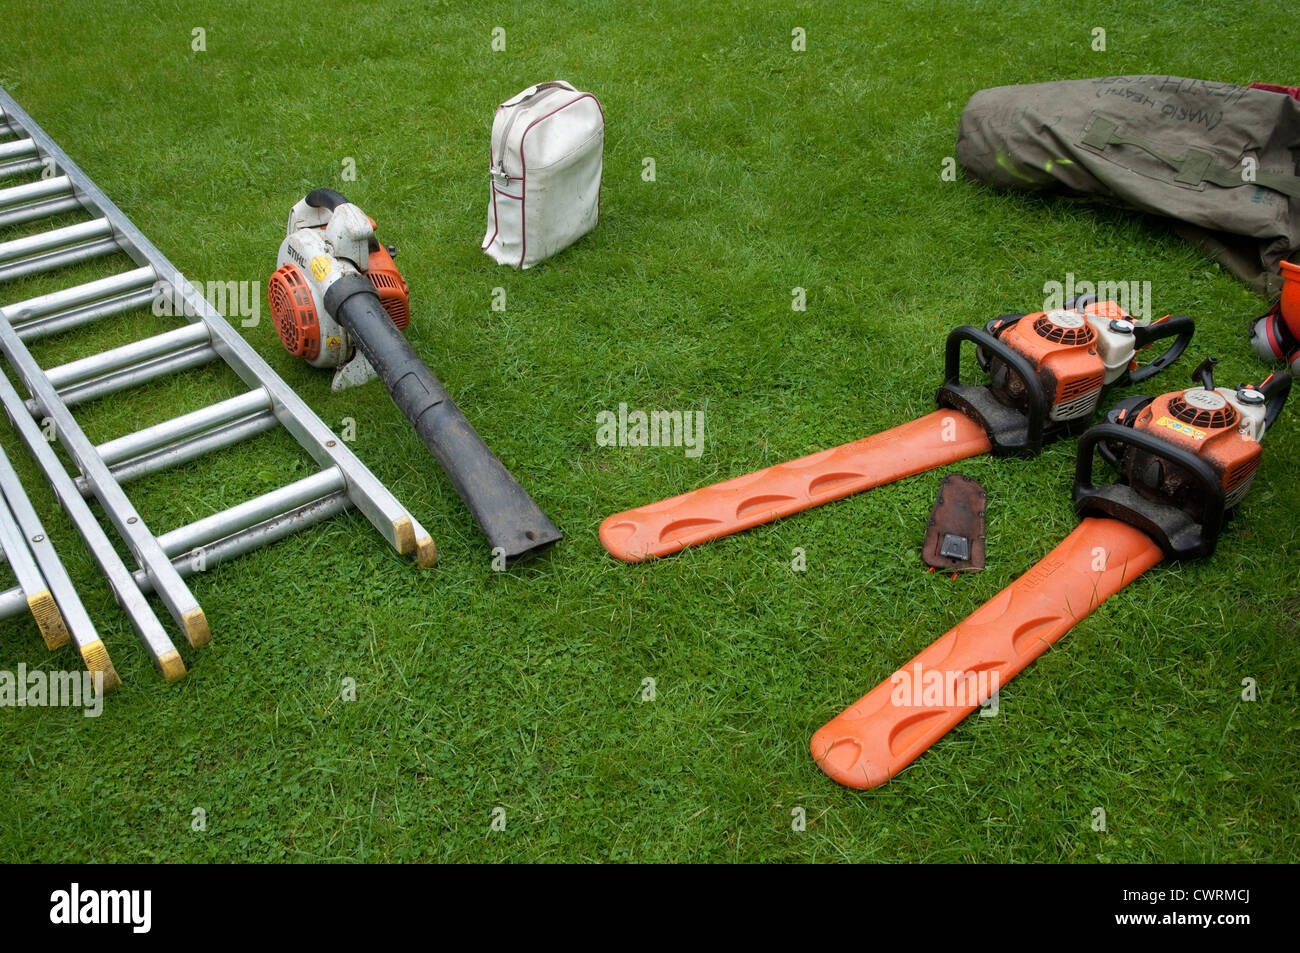 Equipment  / tools including chainsaws, ladders and leaf blower, as used by a Professional Tree Surgeon.  UK Stock Photo